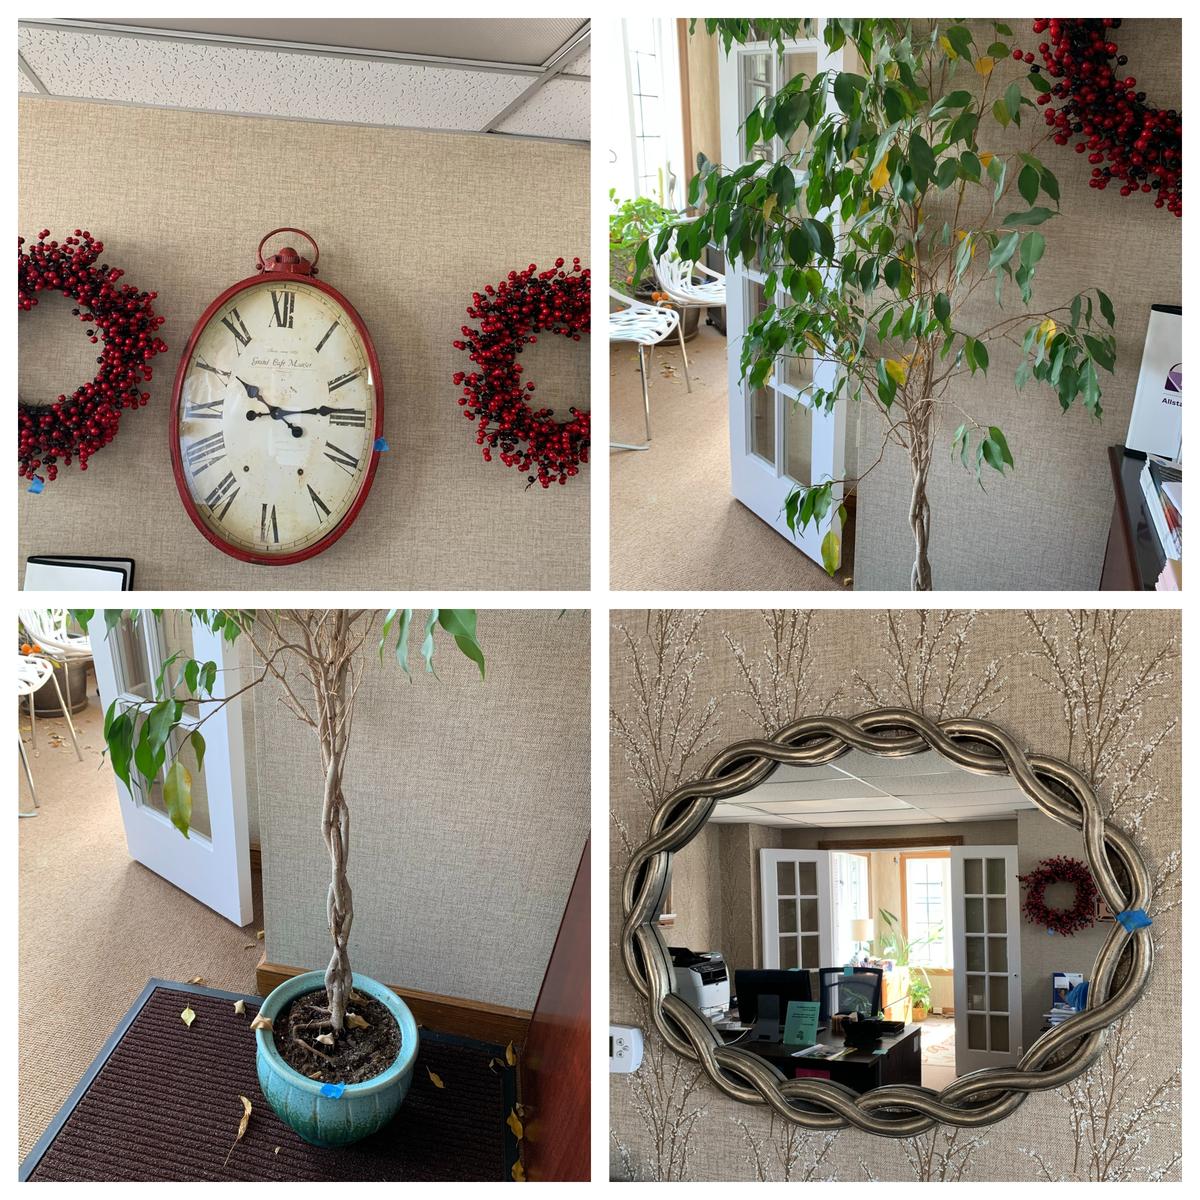 Large Wall Clock with Wreaths, Plant, & Mirror